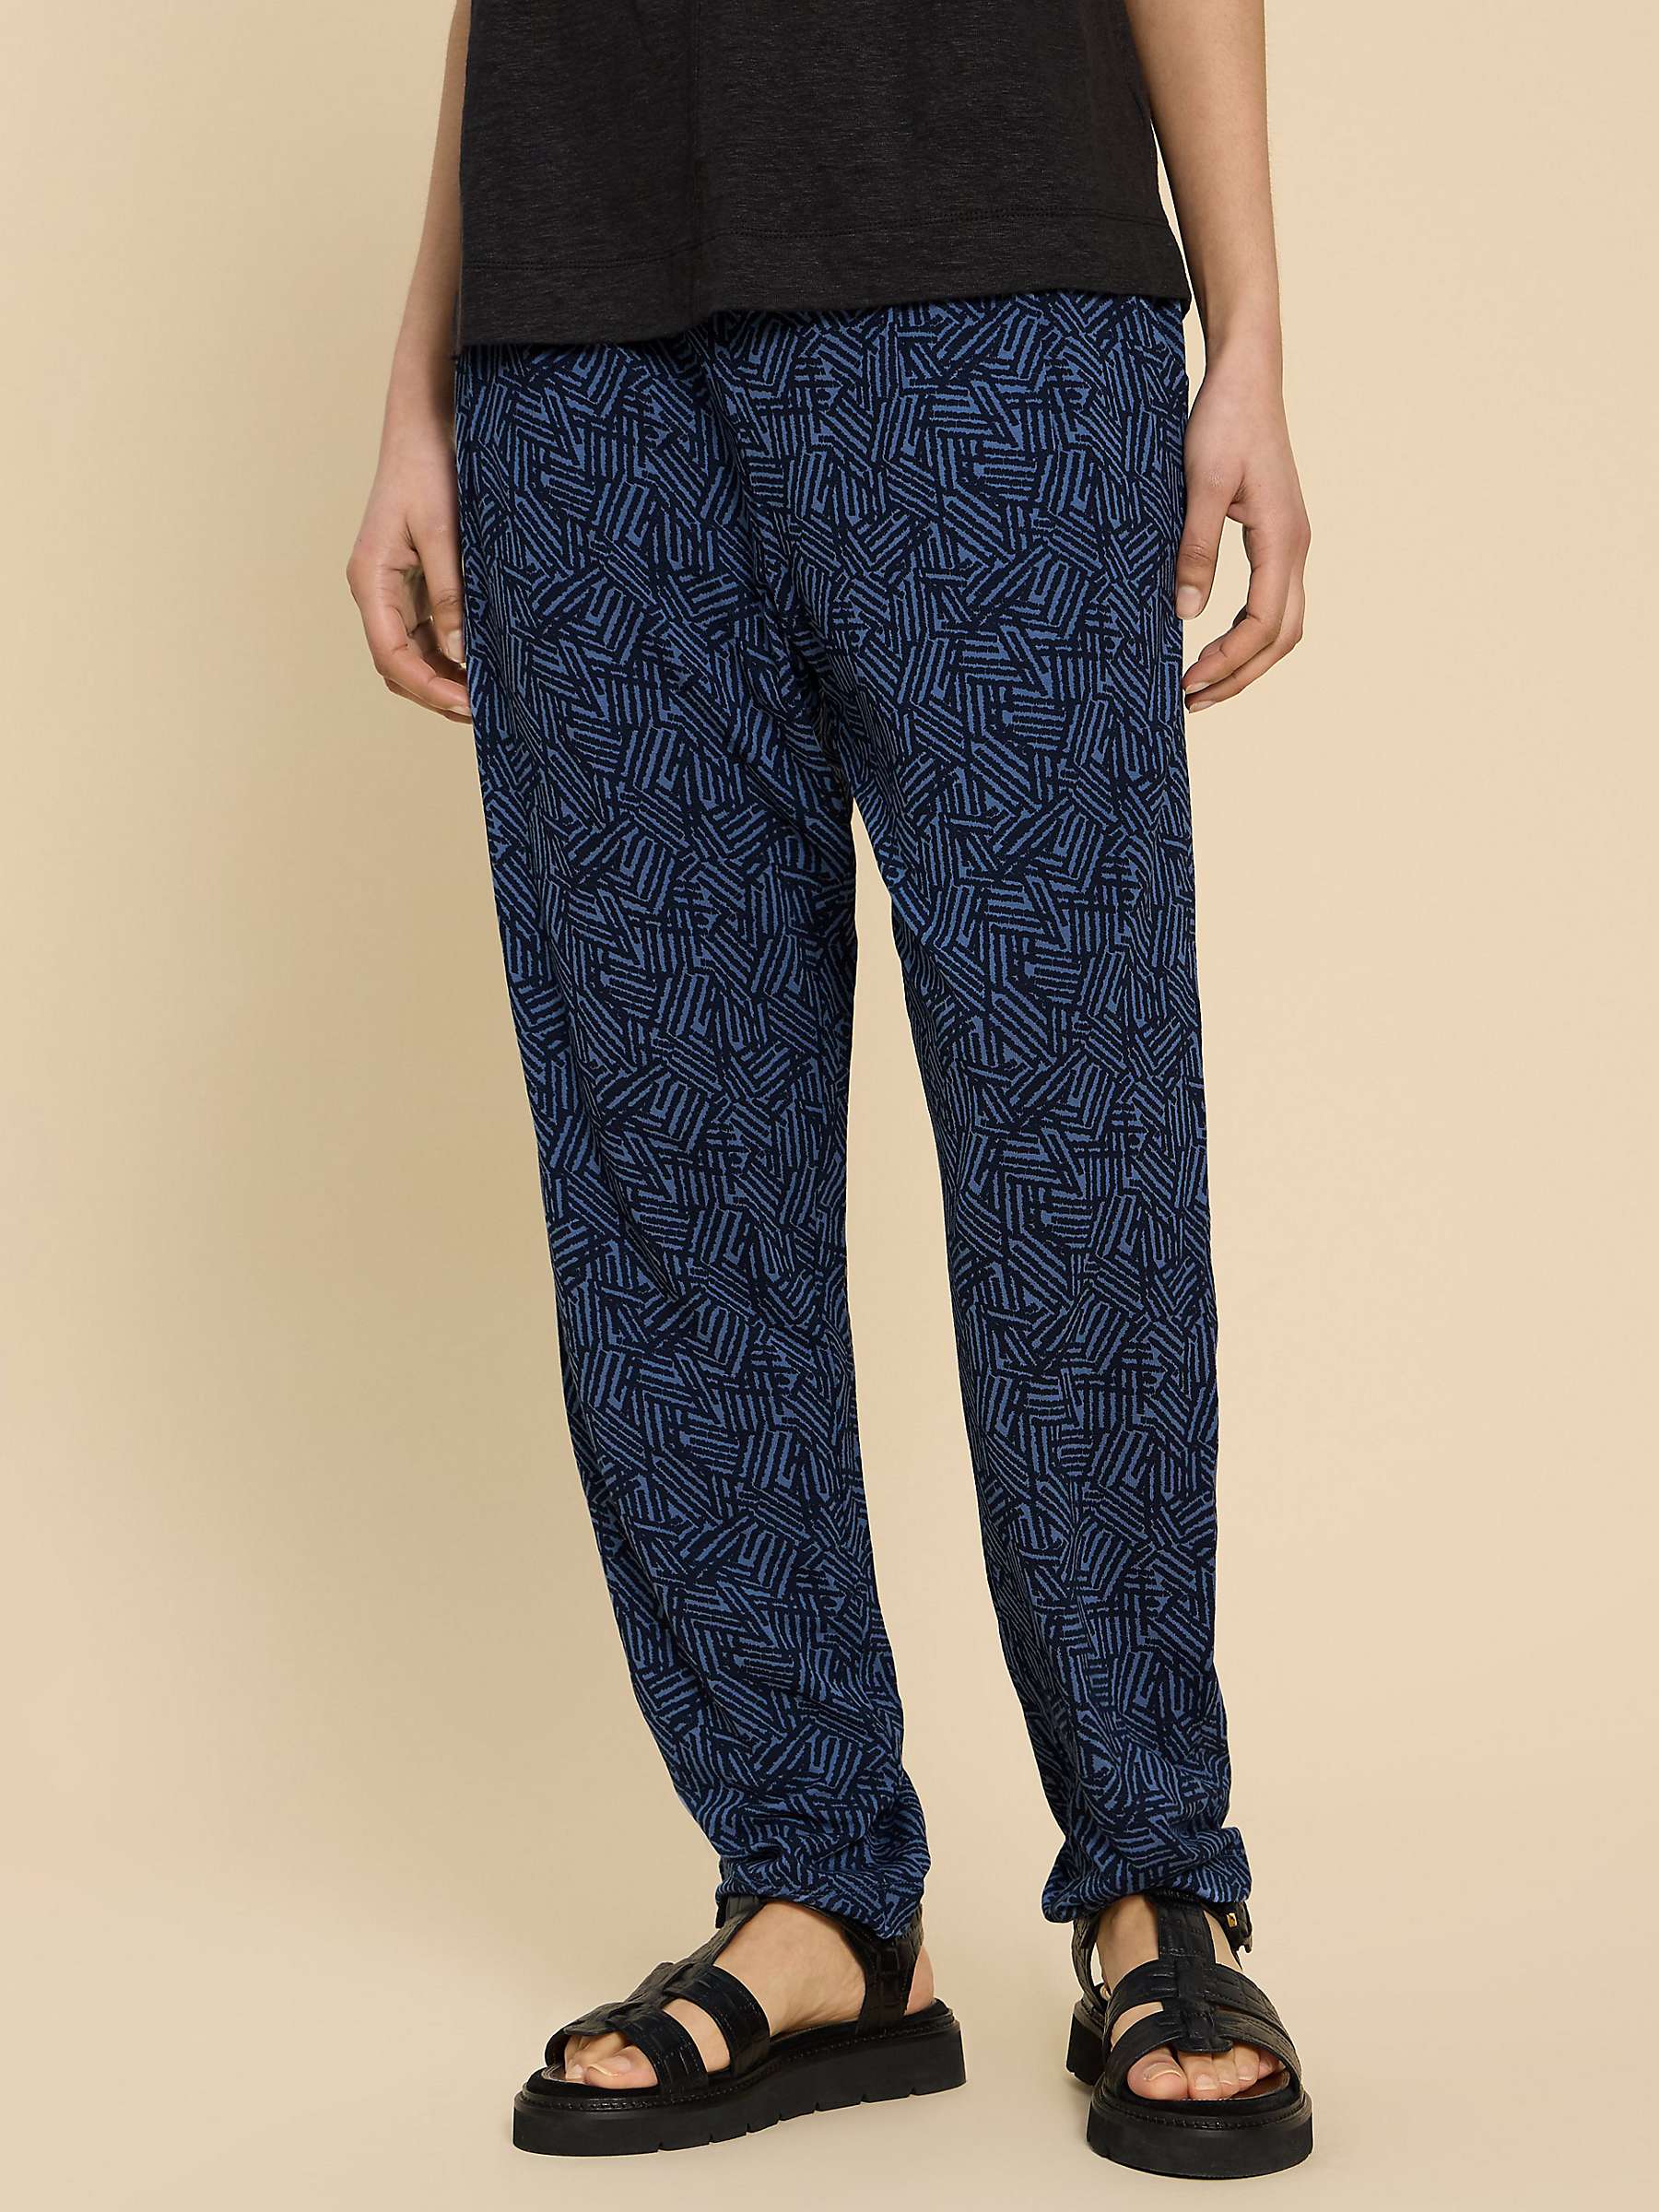 Buy White Stuff Maison Abstract Print Trousers, Navy Online at johnlewis.com